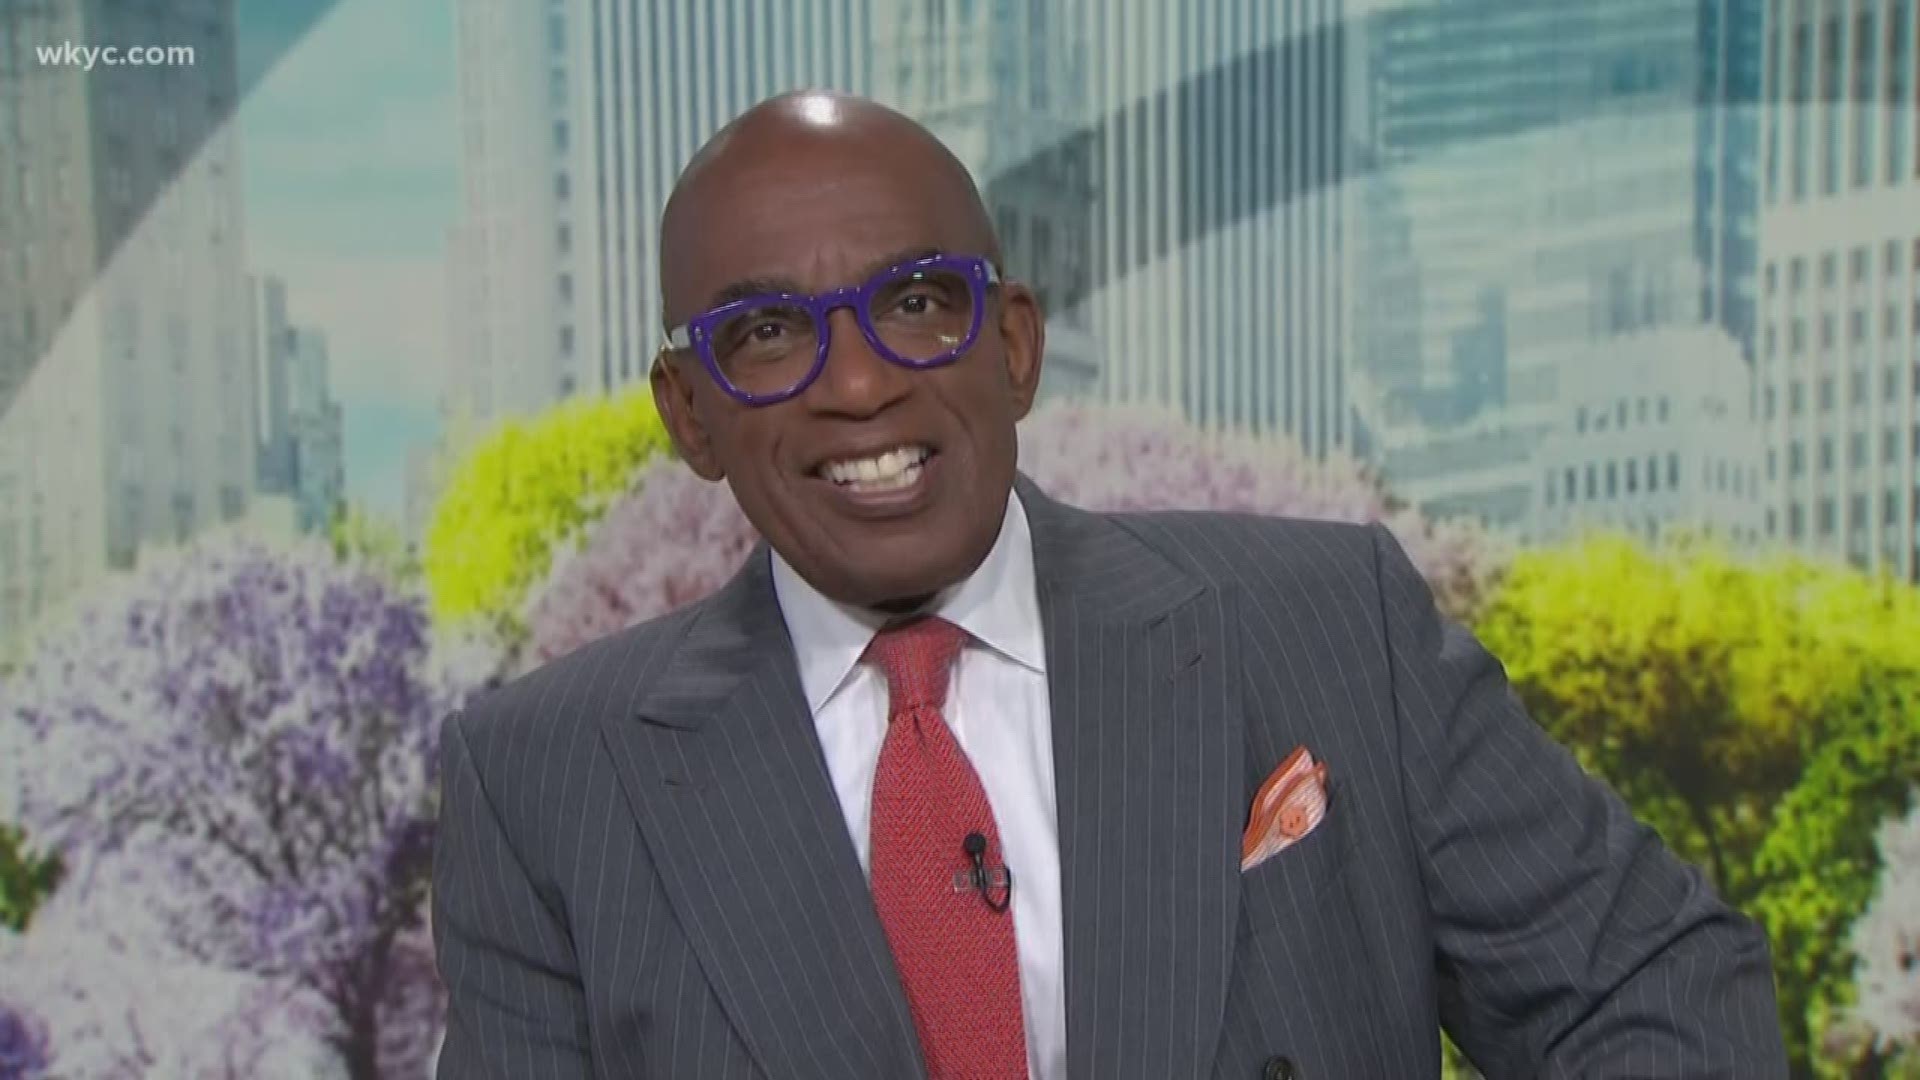 We're so excited to welcome Al Roker back to Cleveland as he shines the spotlight on the city in a new 'Today' series about America's reopening.